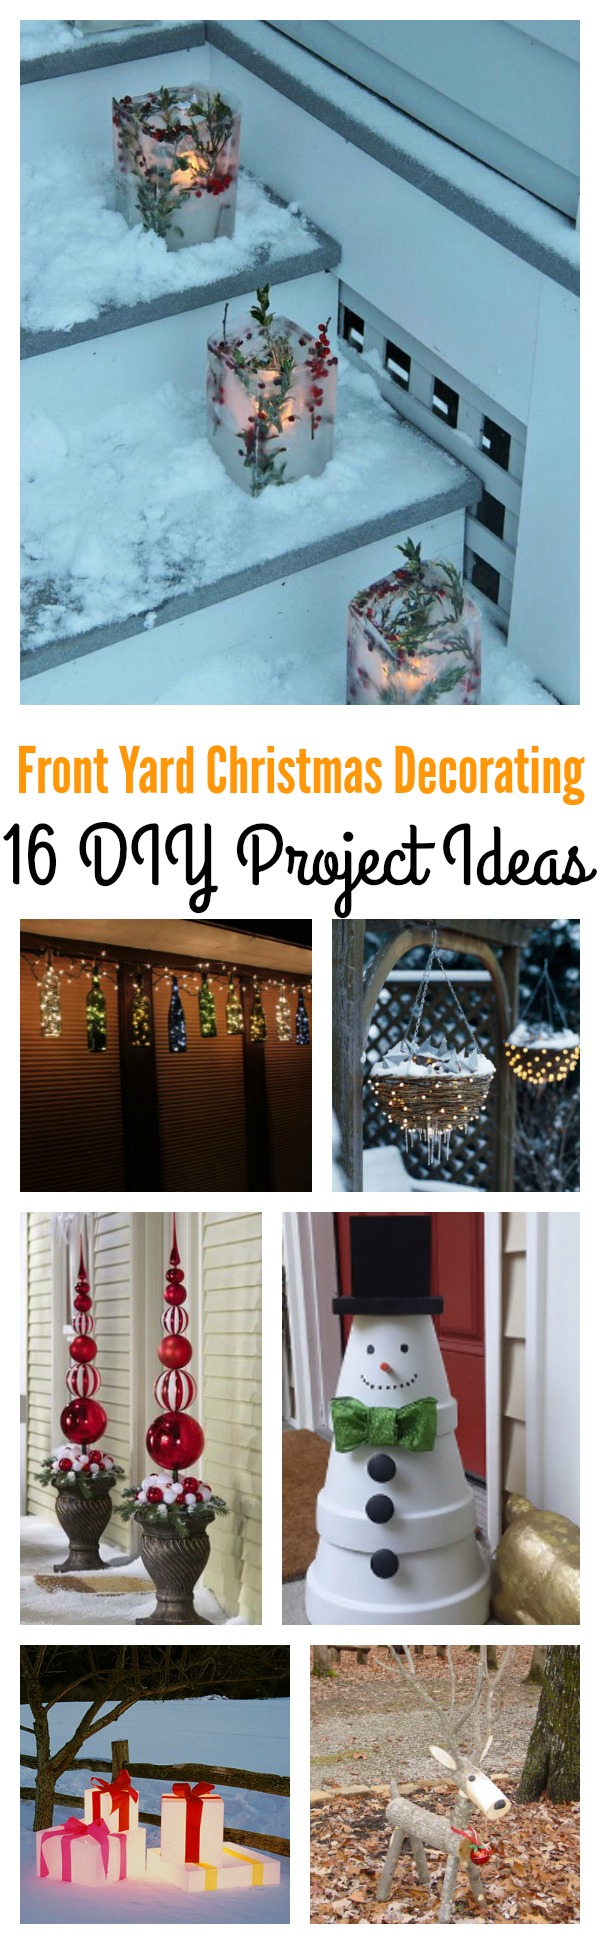 16 DIY Front Yard Christmas Decorating Projects